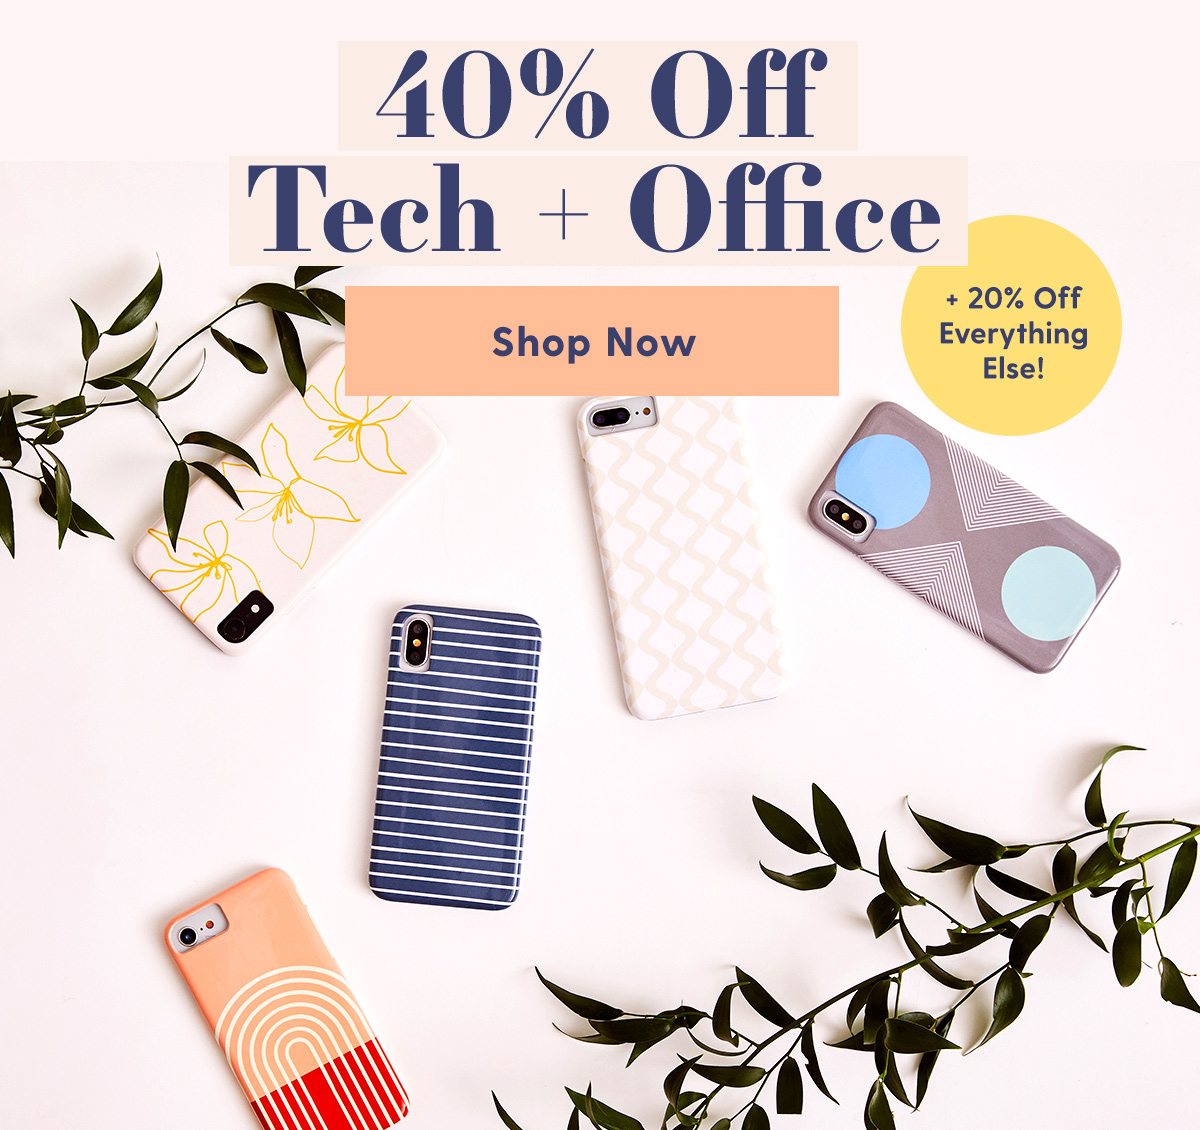 40% Off Tech + Office + 20% Off Everthing Else! Shop Now